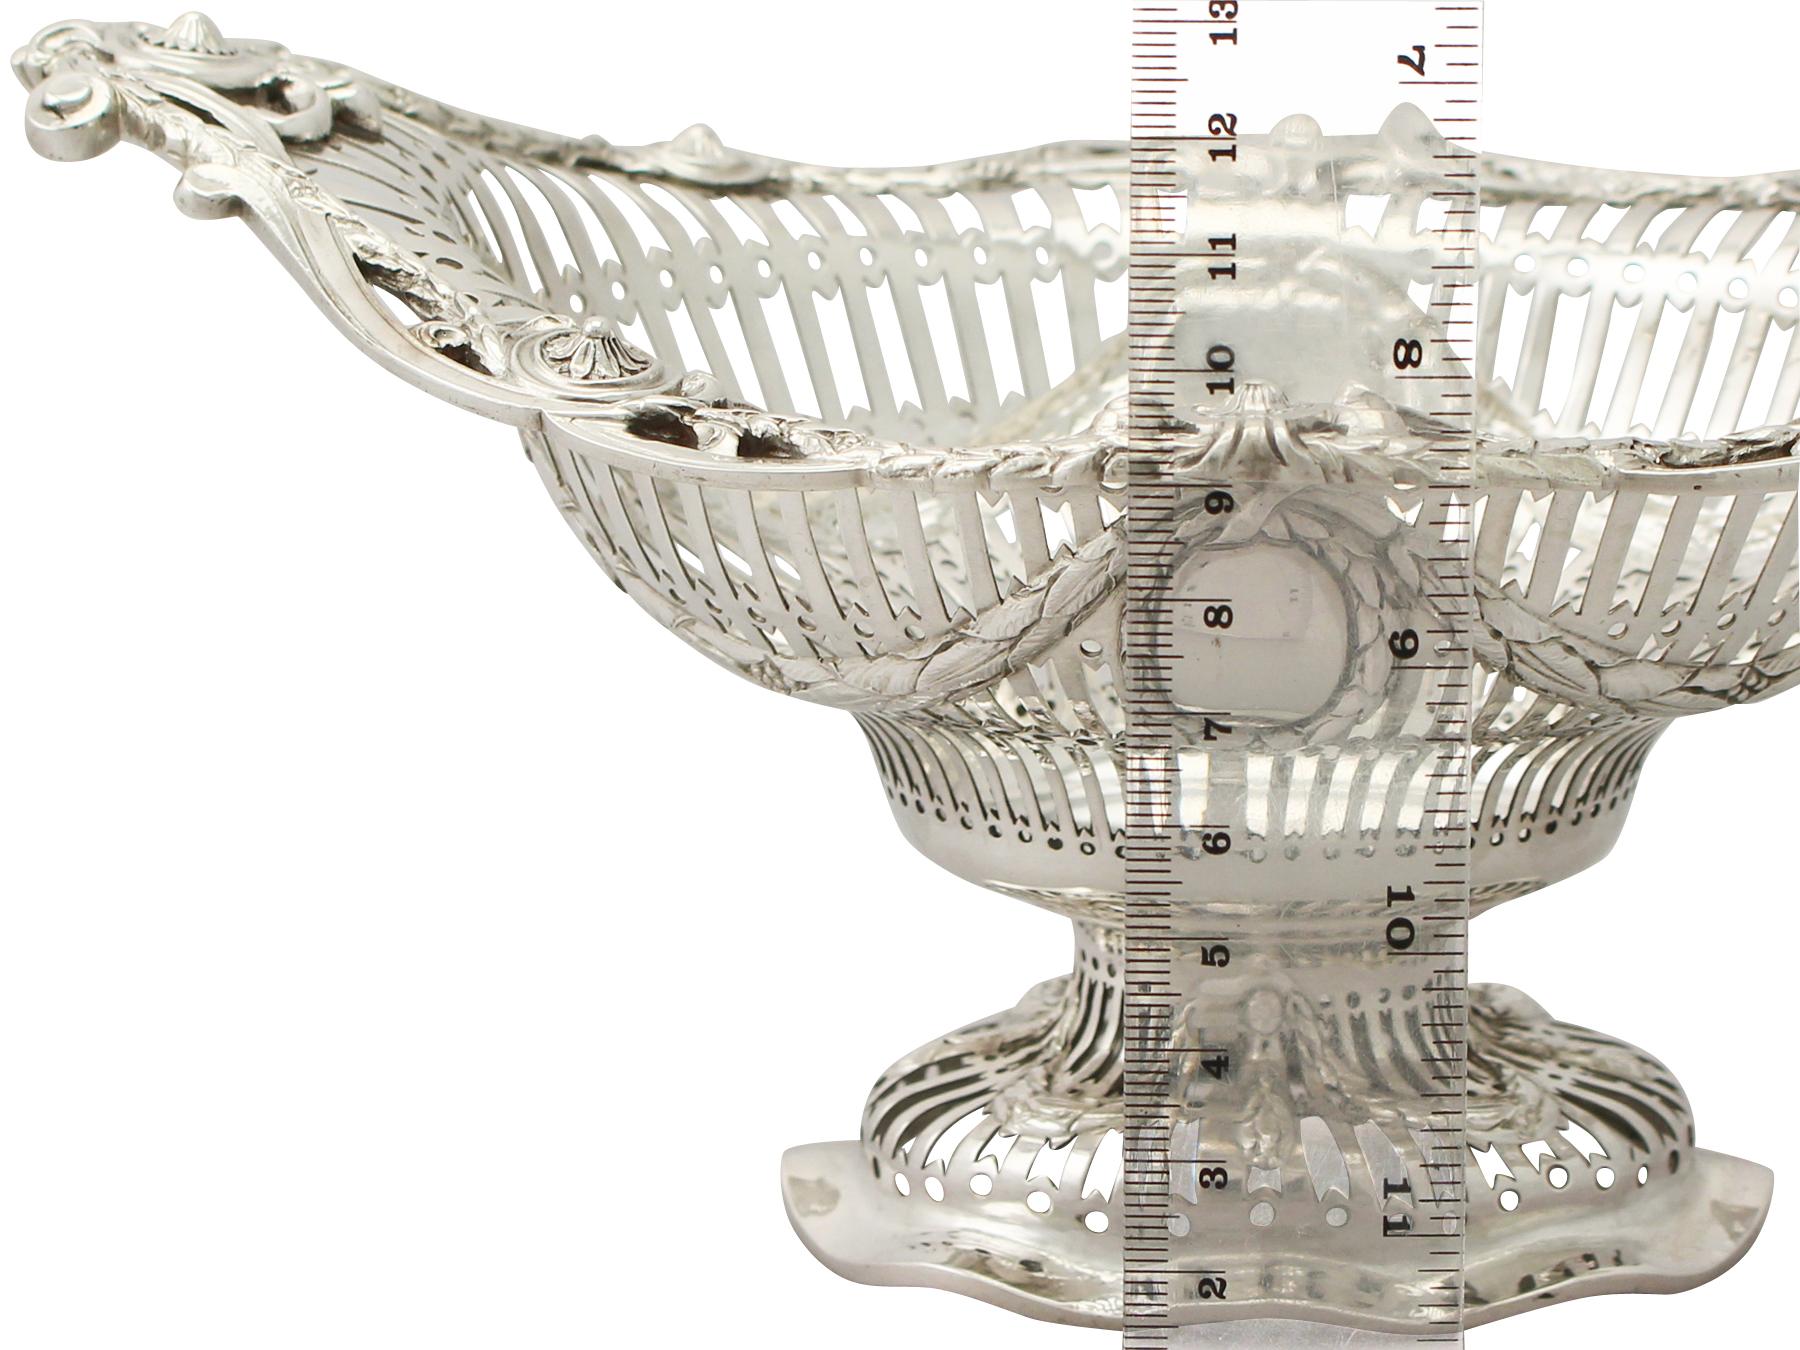 19th Century Antique Victorian Sterling Silver Presentation/Fruit Dish In Excellent Condition For Sale In Jesmond, Newcastle Upon Tyne